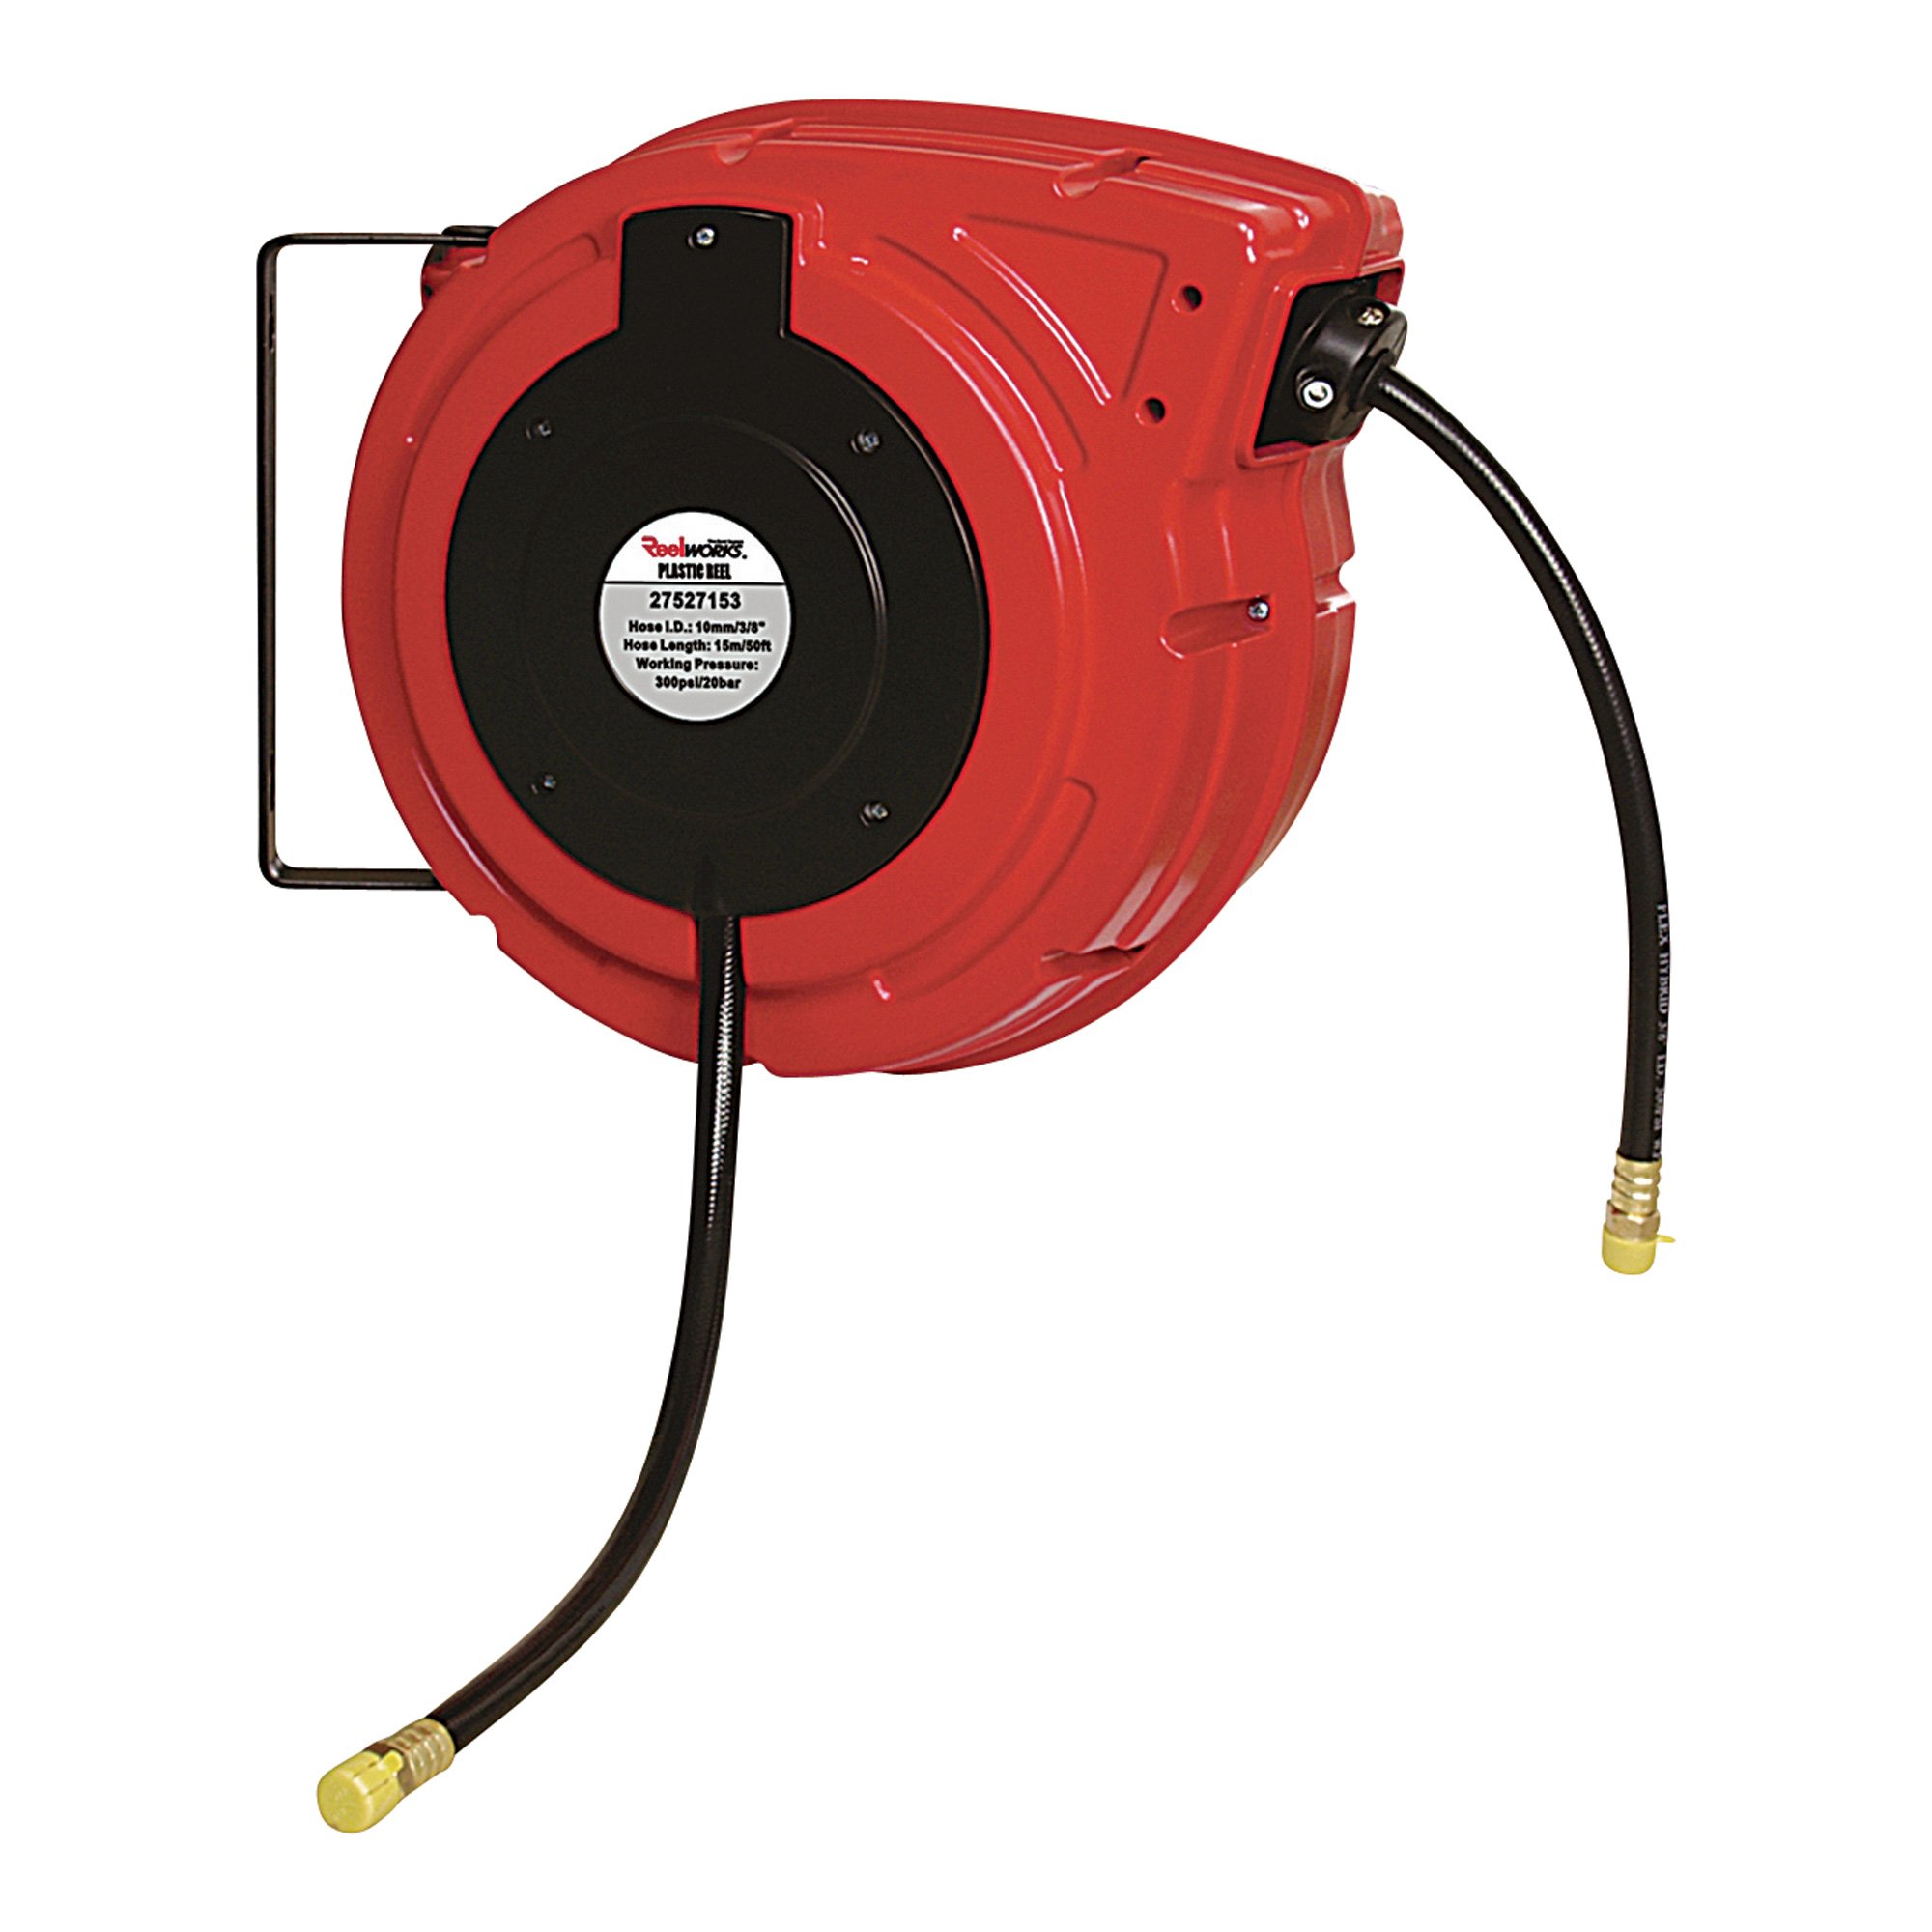 Ironton Auto Rewind Air Hose Reel - with 3/8in. x 50ft. Hybrid Polymer Hose, Max. 300 PSI